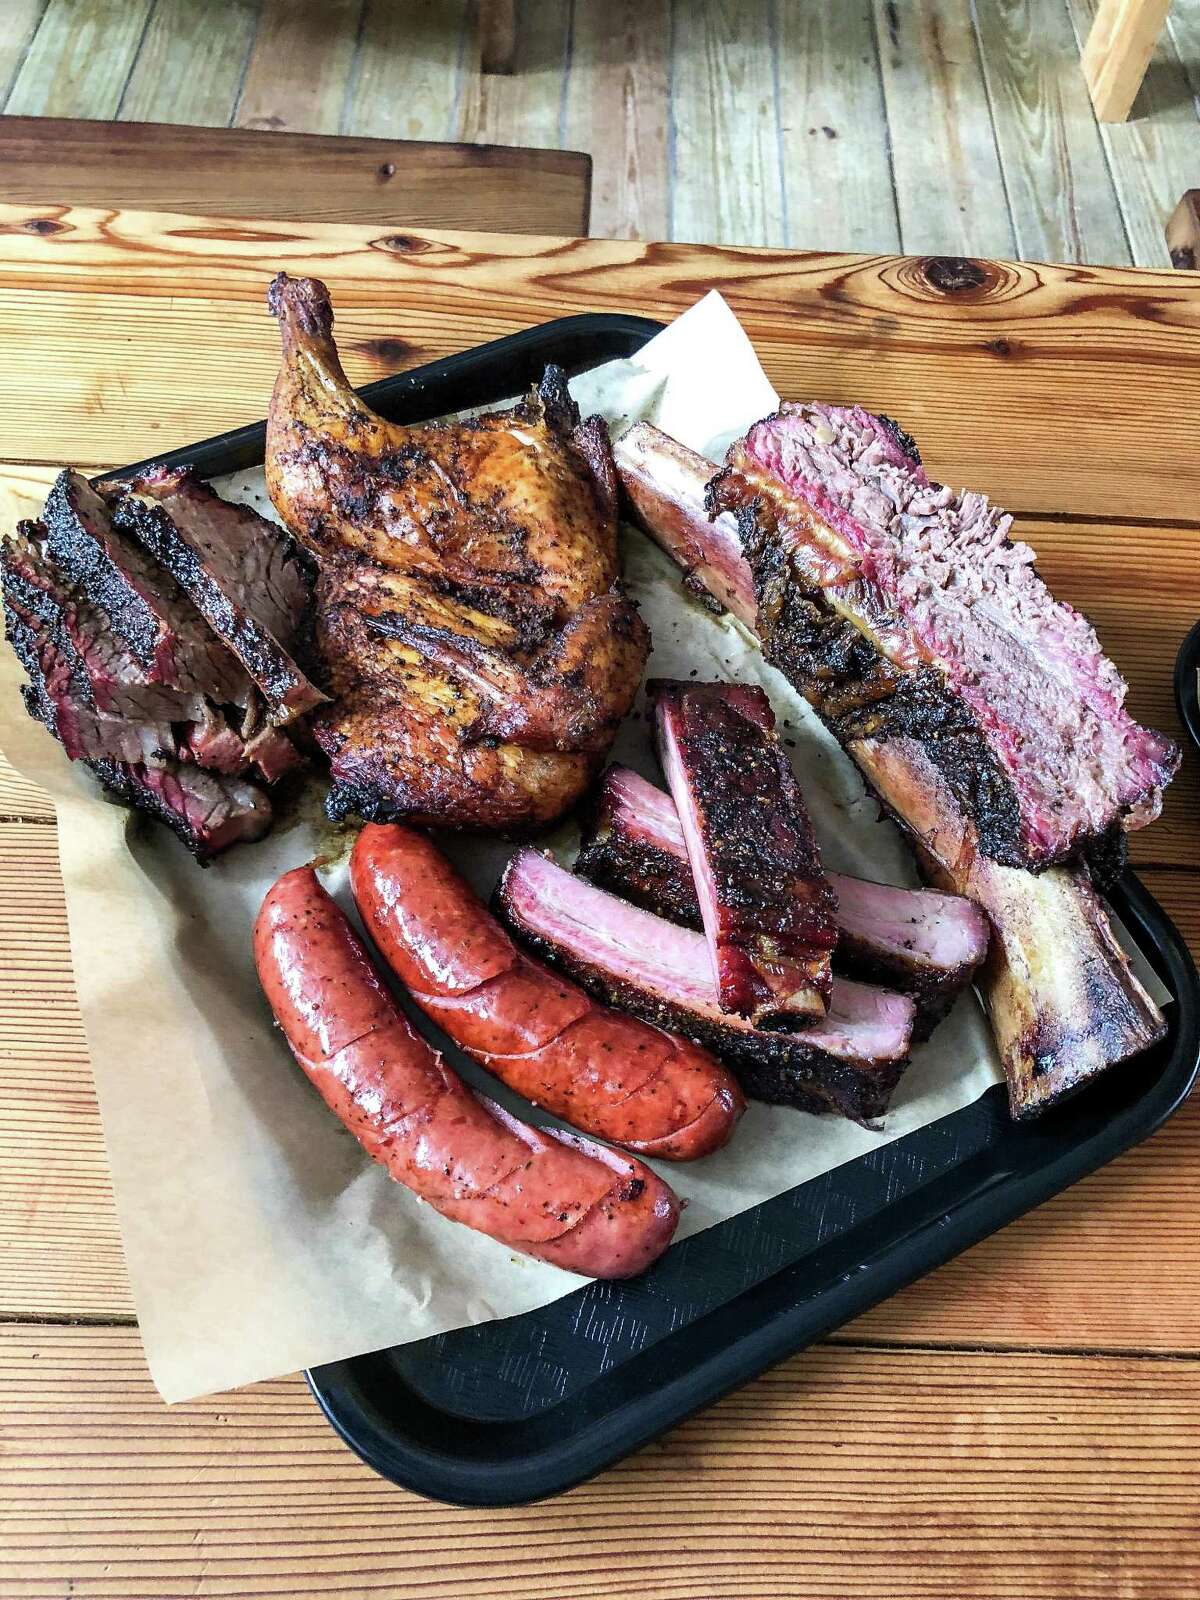 Barbecue tray at Harlem Road Texas BBQ in Richmond